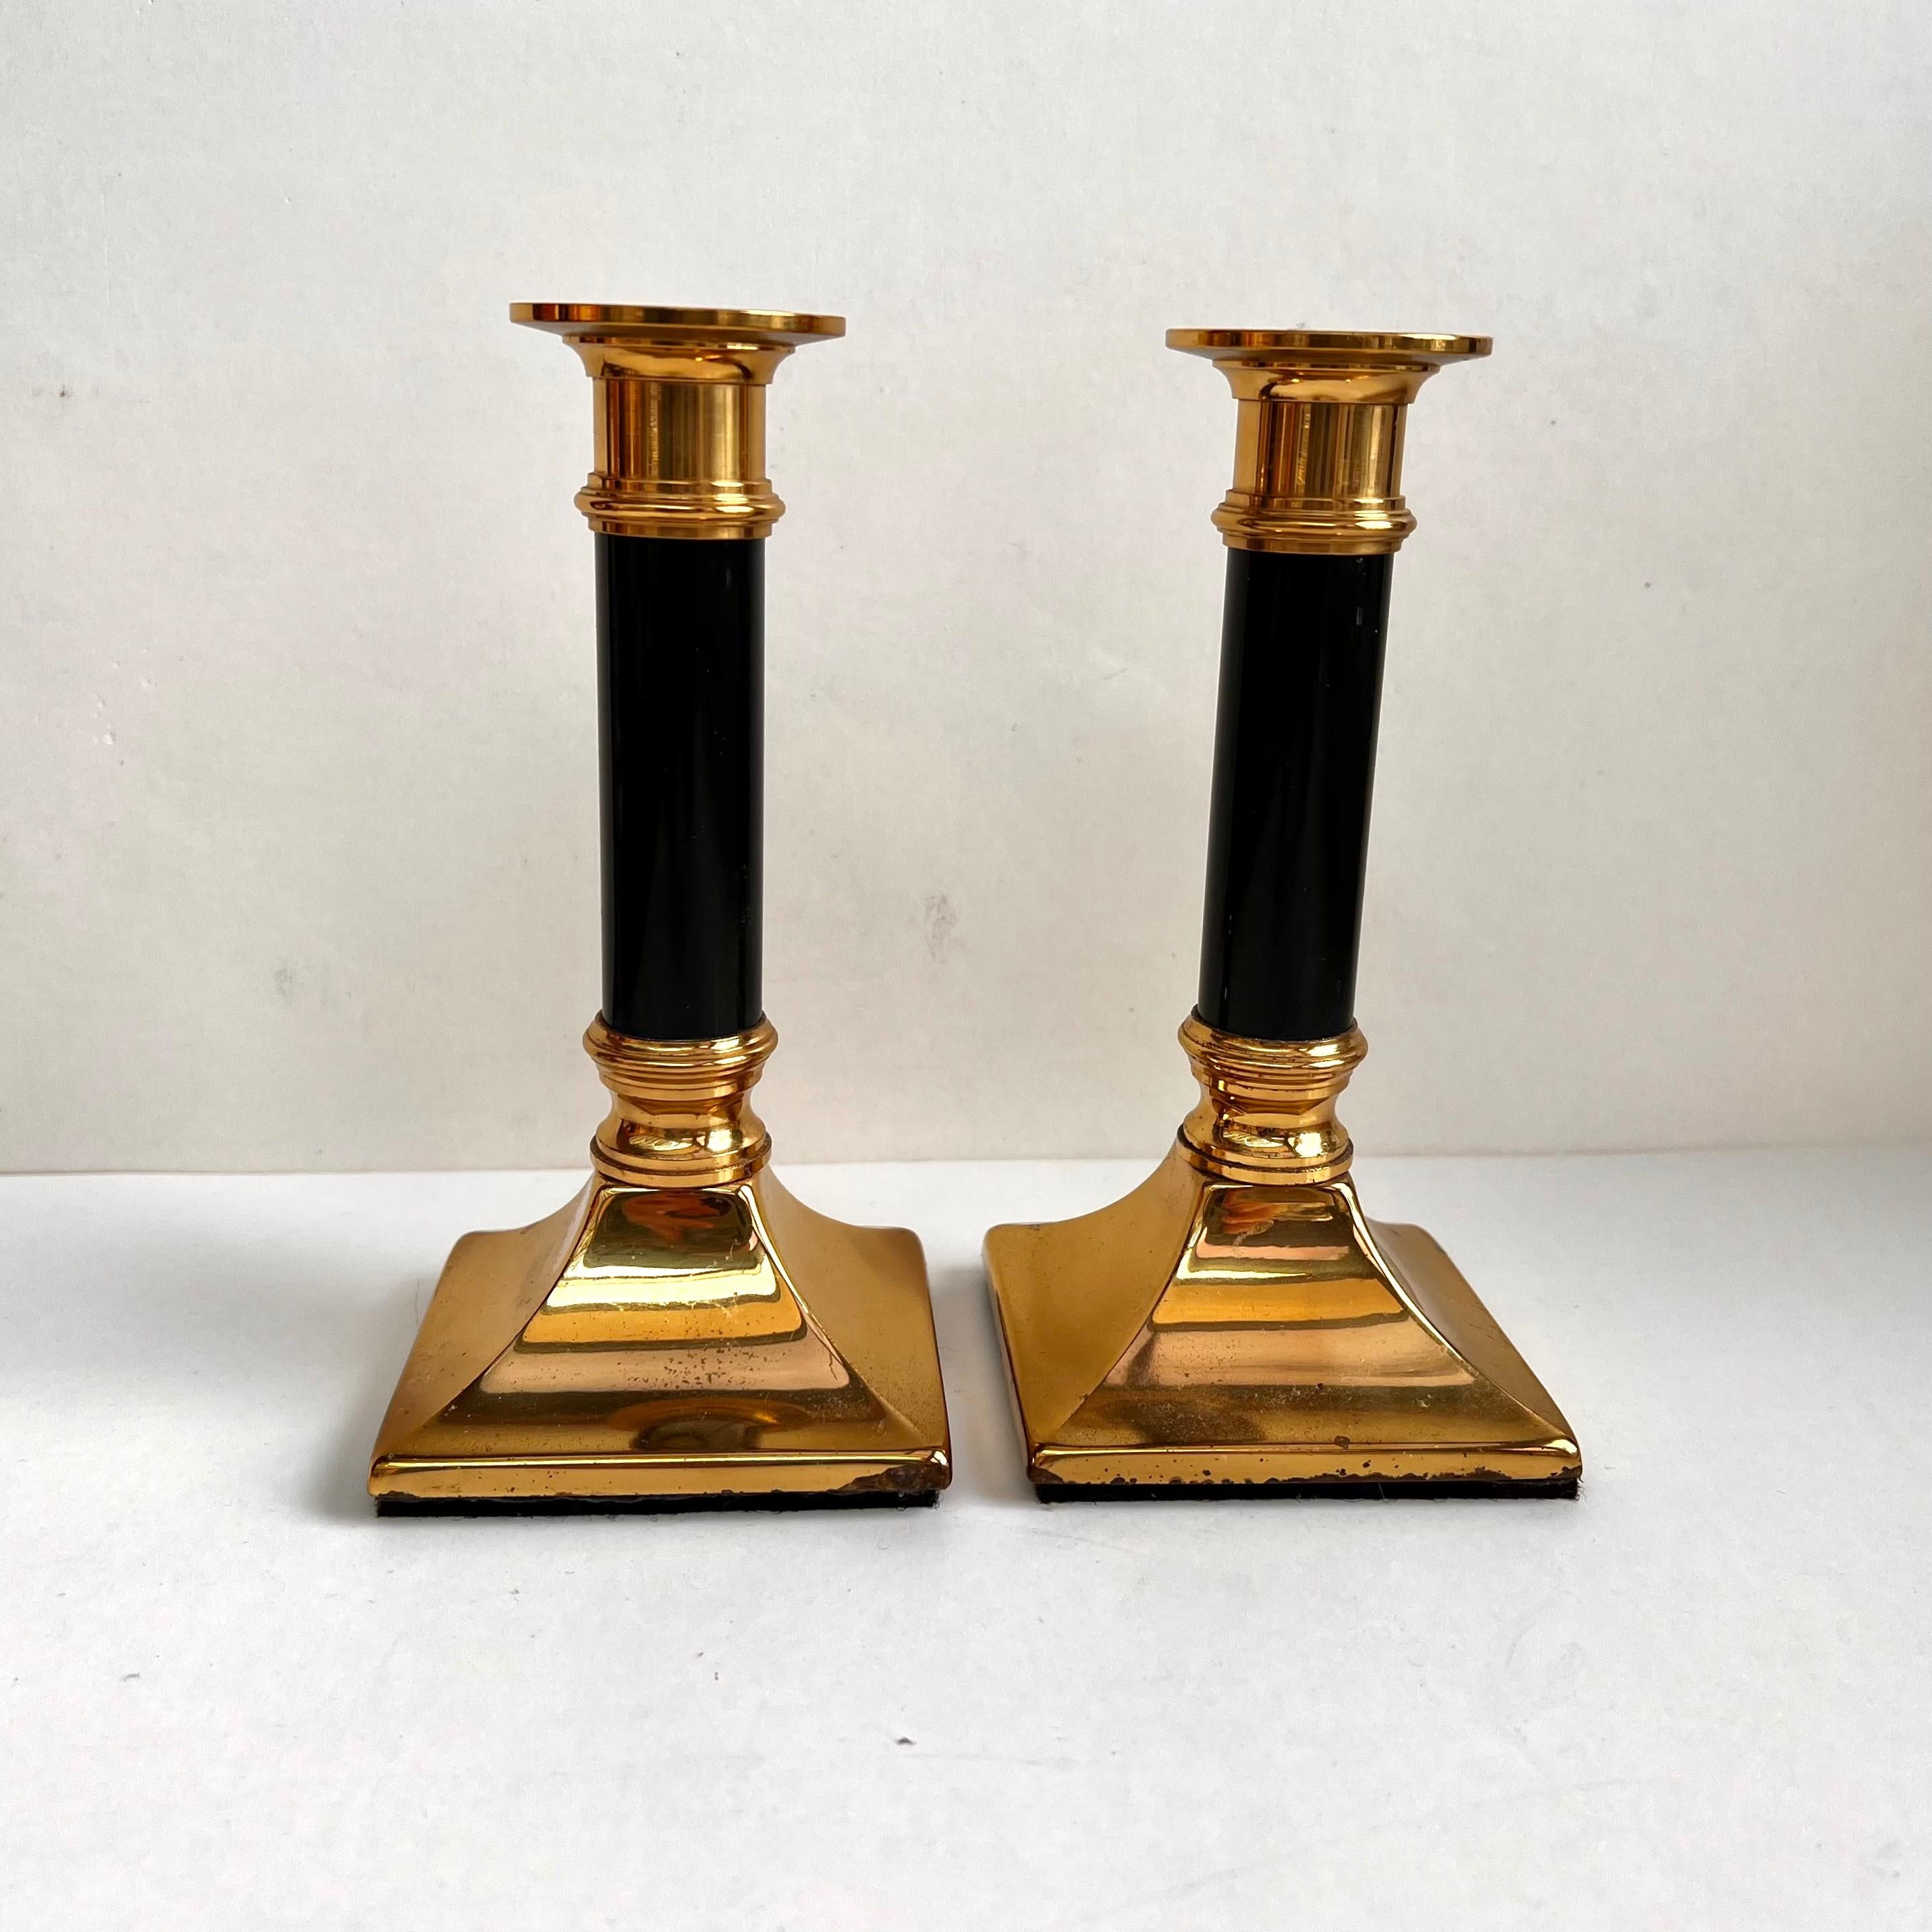 Original Vintage Set of 2 Candlesticks made of gilt brass. 

Manufactured in France, 1970s.

Candlesticks will decorate the interior and serve as an elegant stand for a table candle. 

The product is made of high-quality brass characterized by